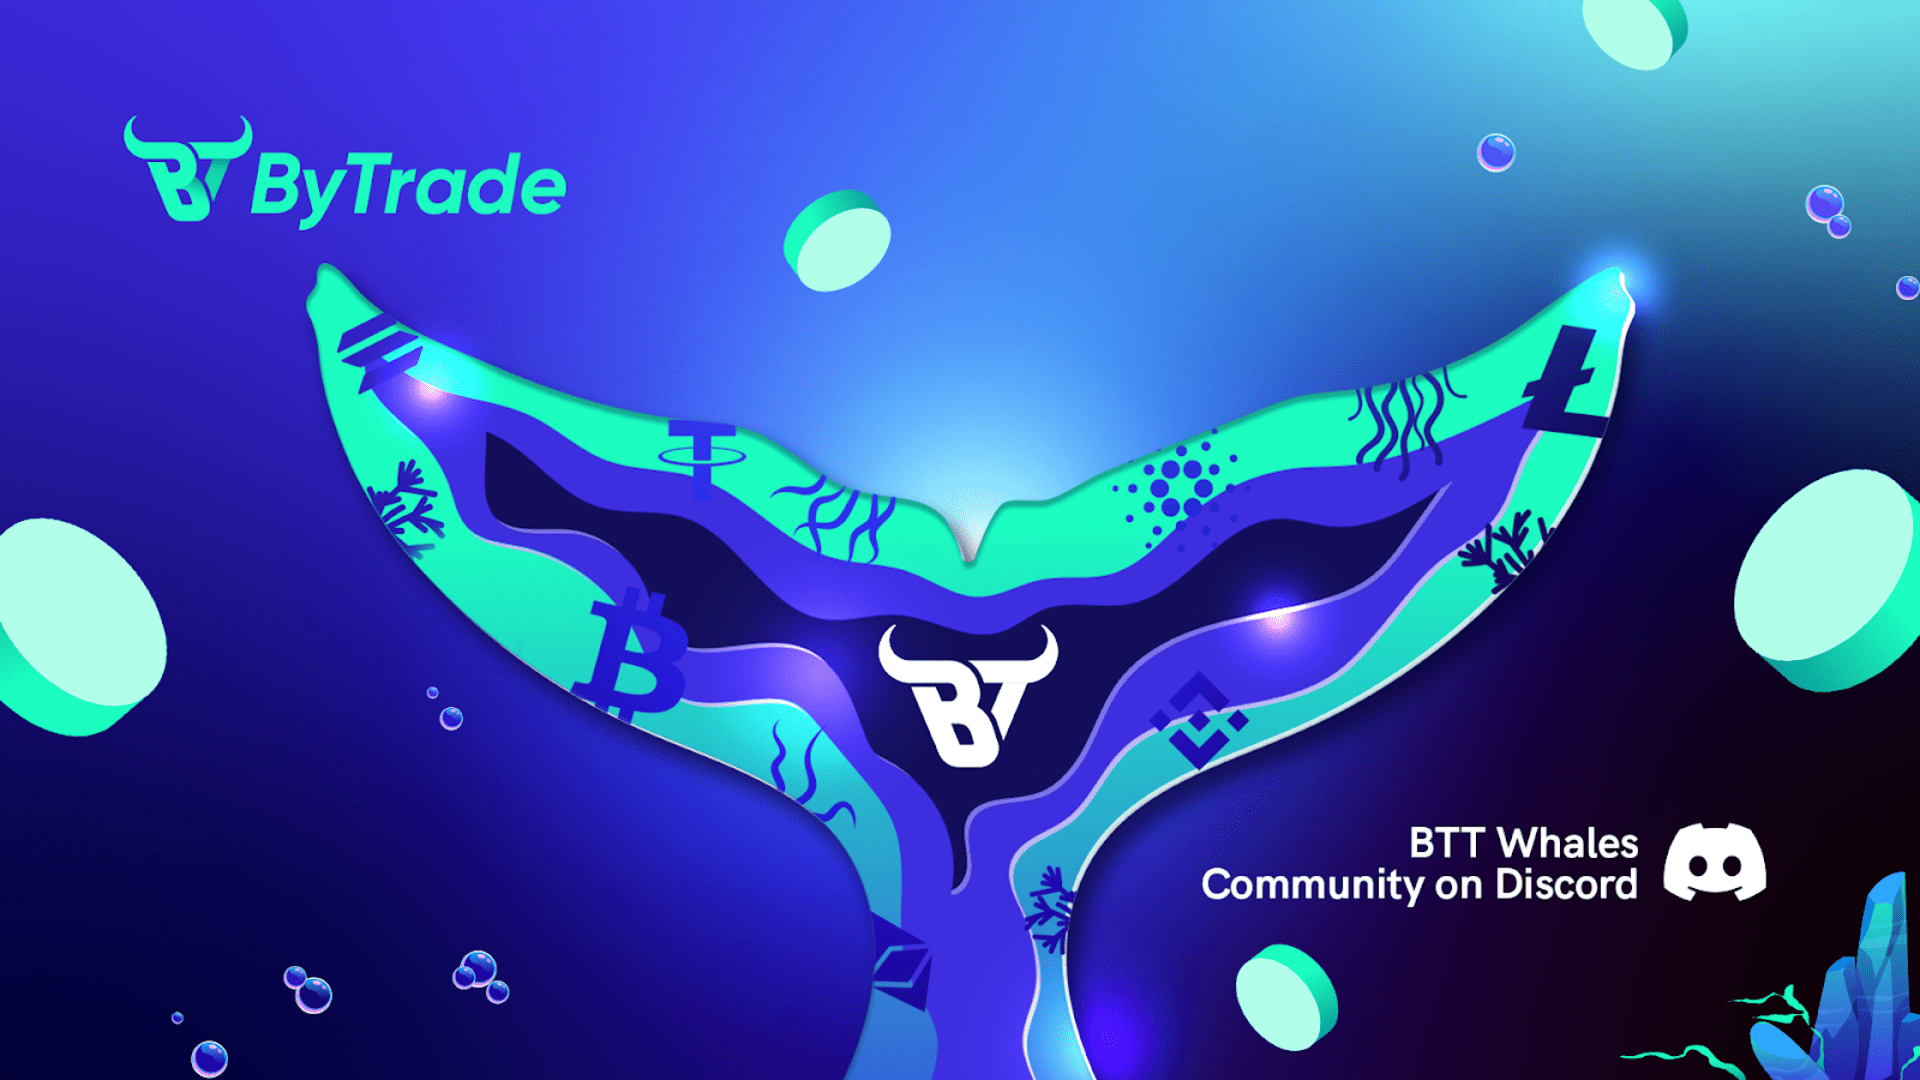 ByTrade Launches its Exclusive BTT Whales Private Discord Community With Exciting Benefits